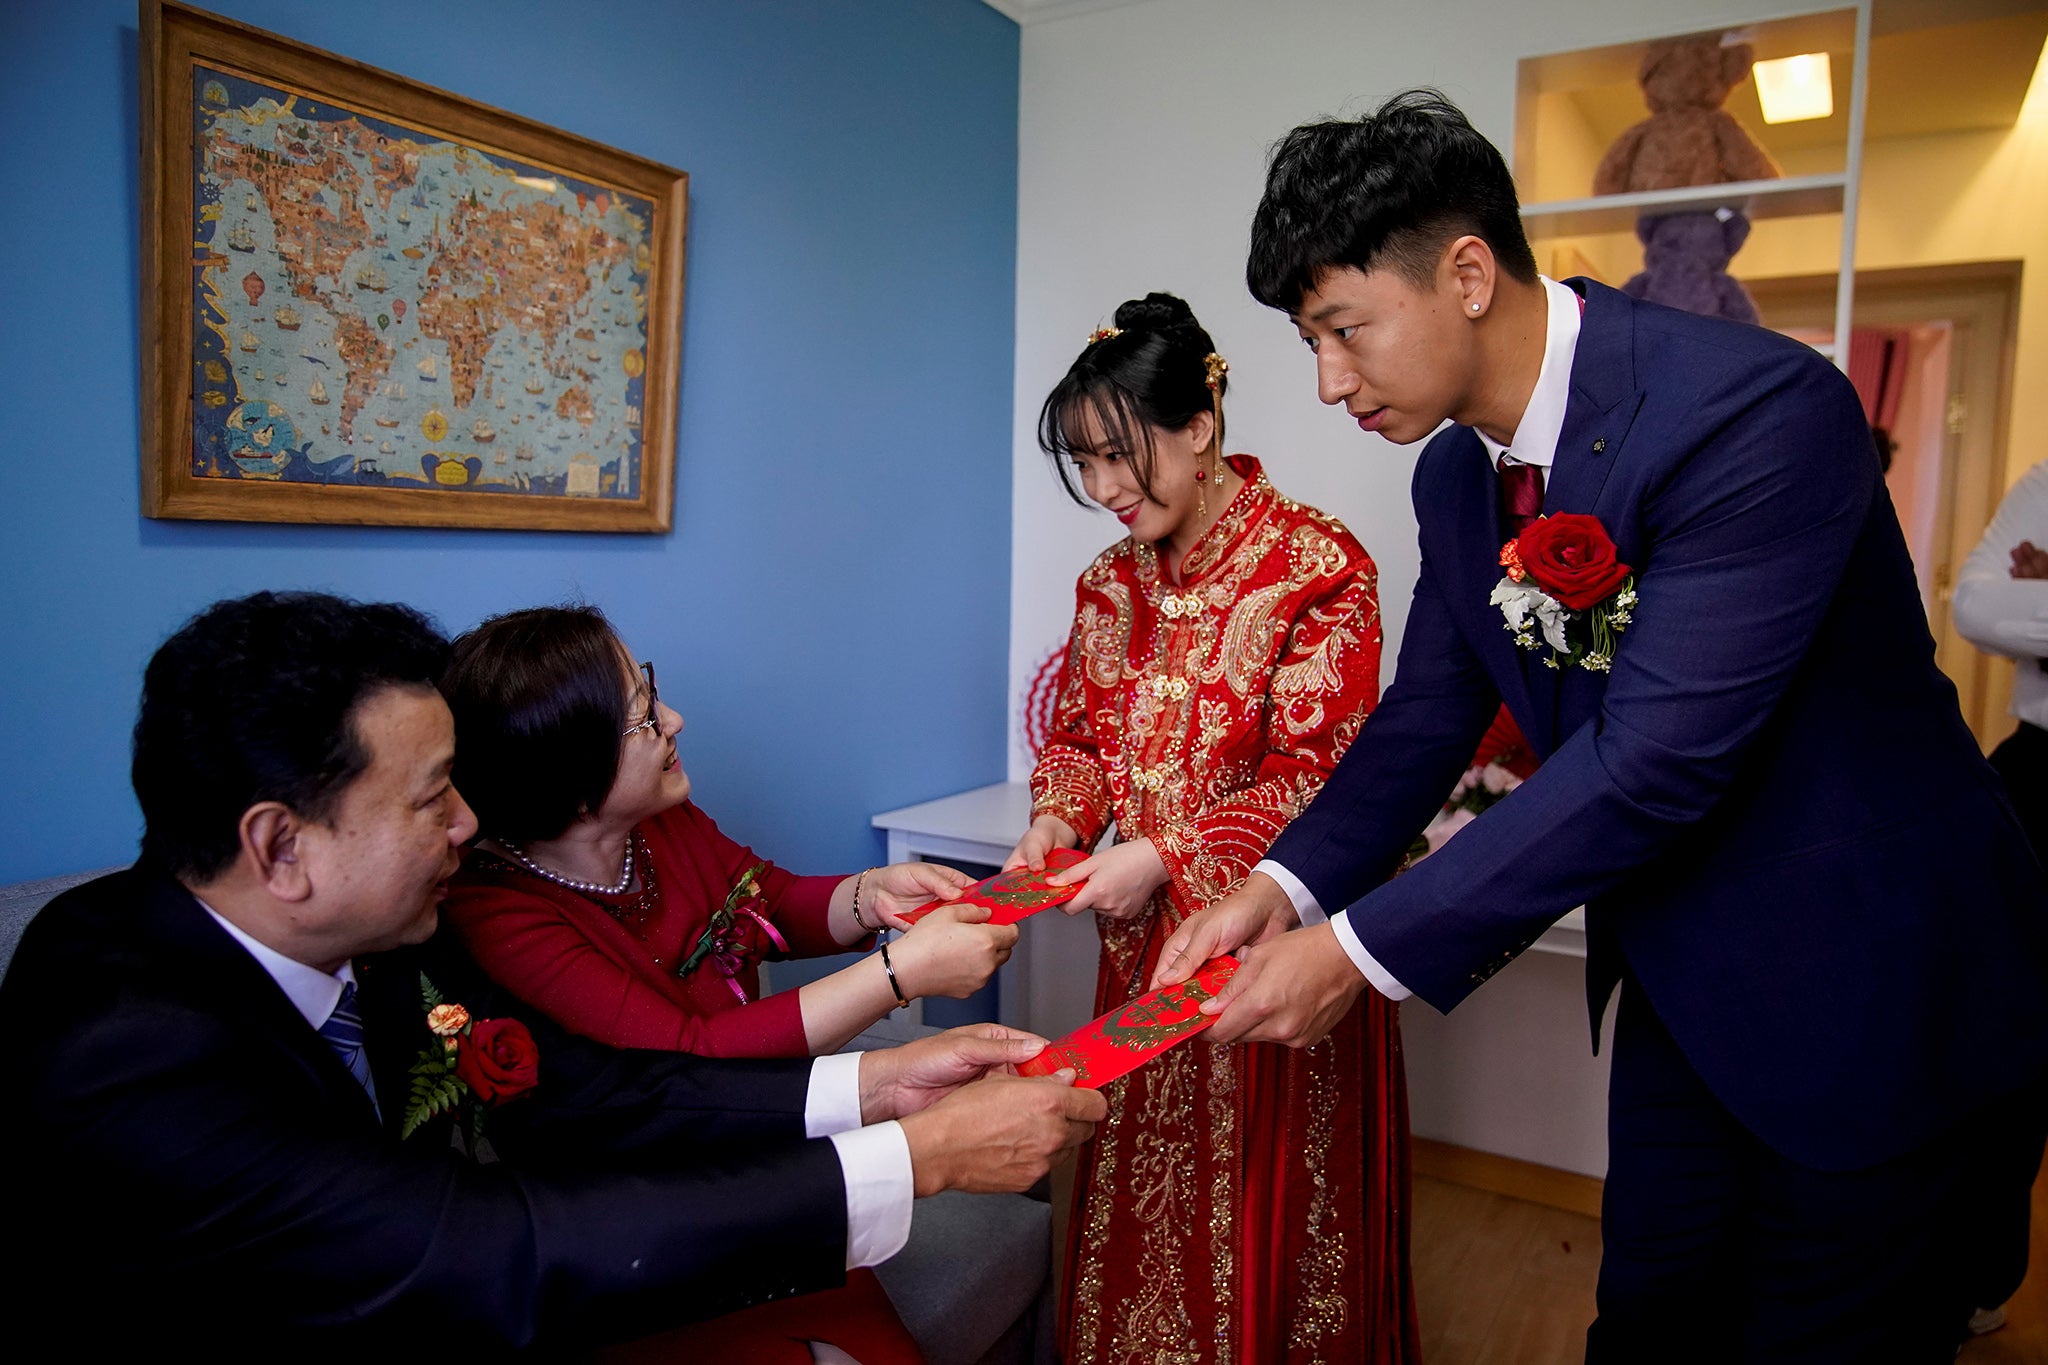 Pan Wenjun and Wei Jiawen receive red envelopes from Pan's parents on the day of their wedding